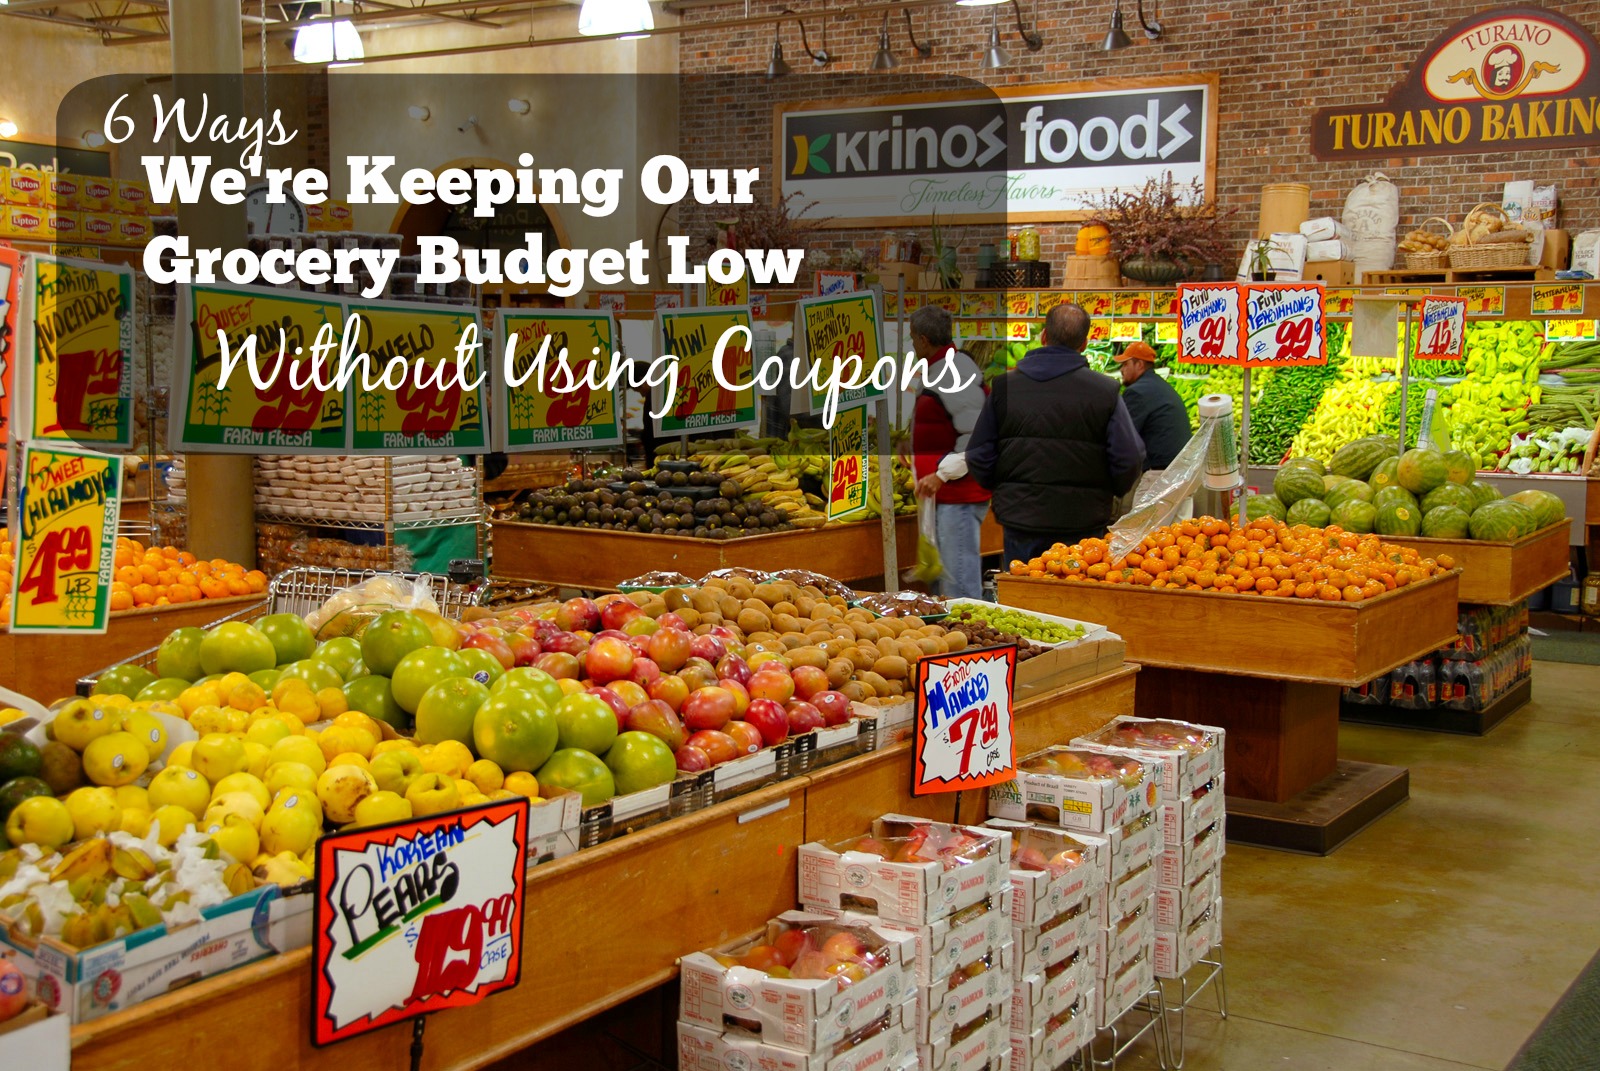 6 Ways We're Keeping Our Grocery Budget Low Without Using Coupons